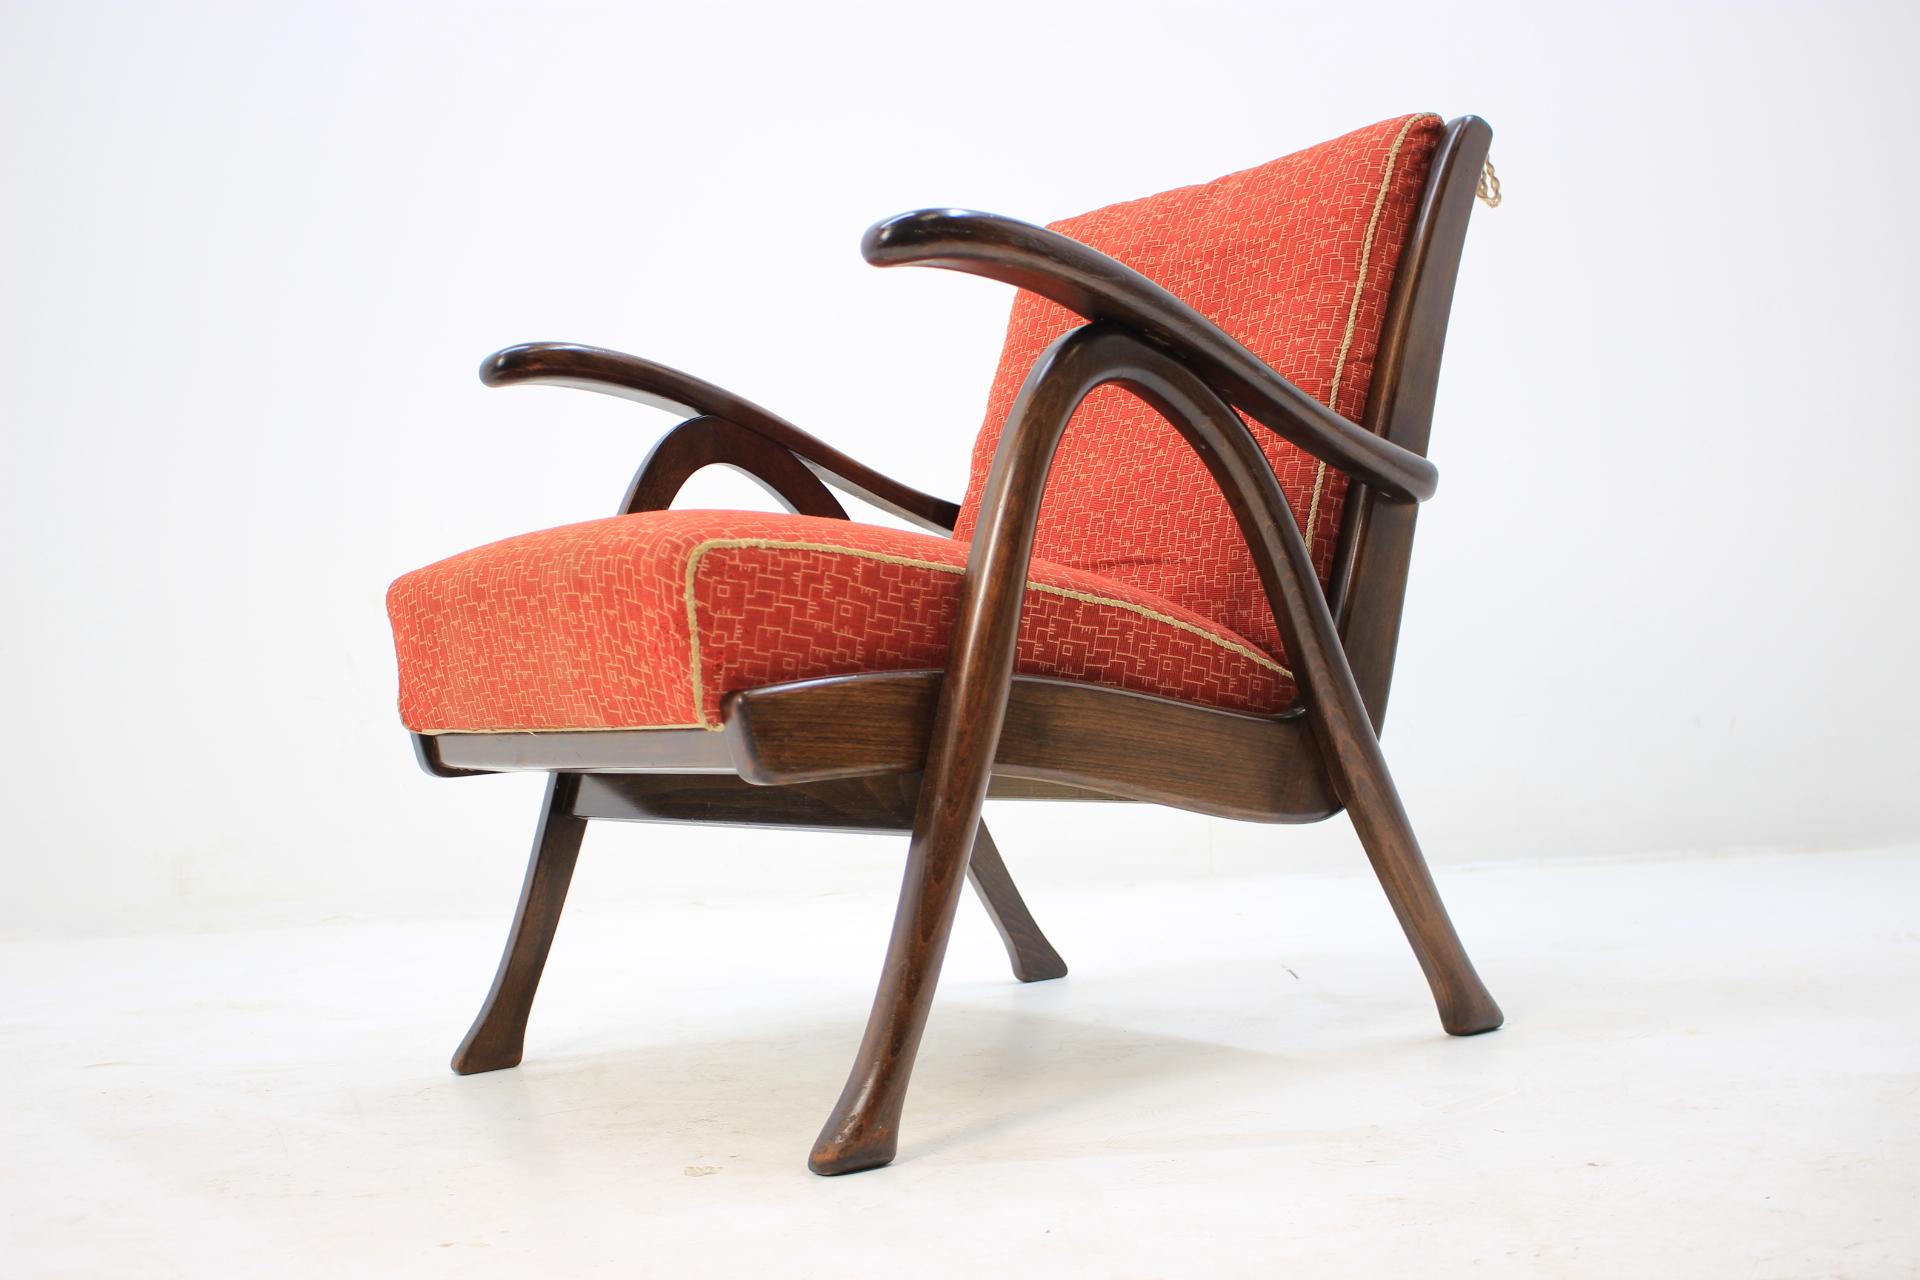 - 1930s
- maker: Thonet
- very good original condition including original upholstery
- labeled
- geometric pattern textile.